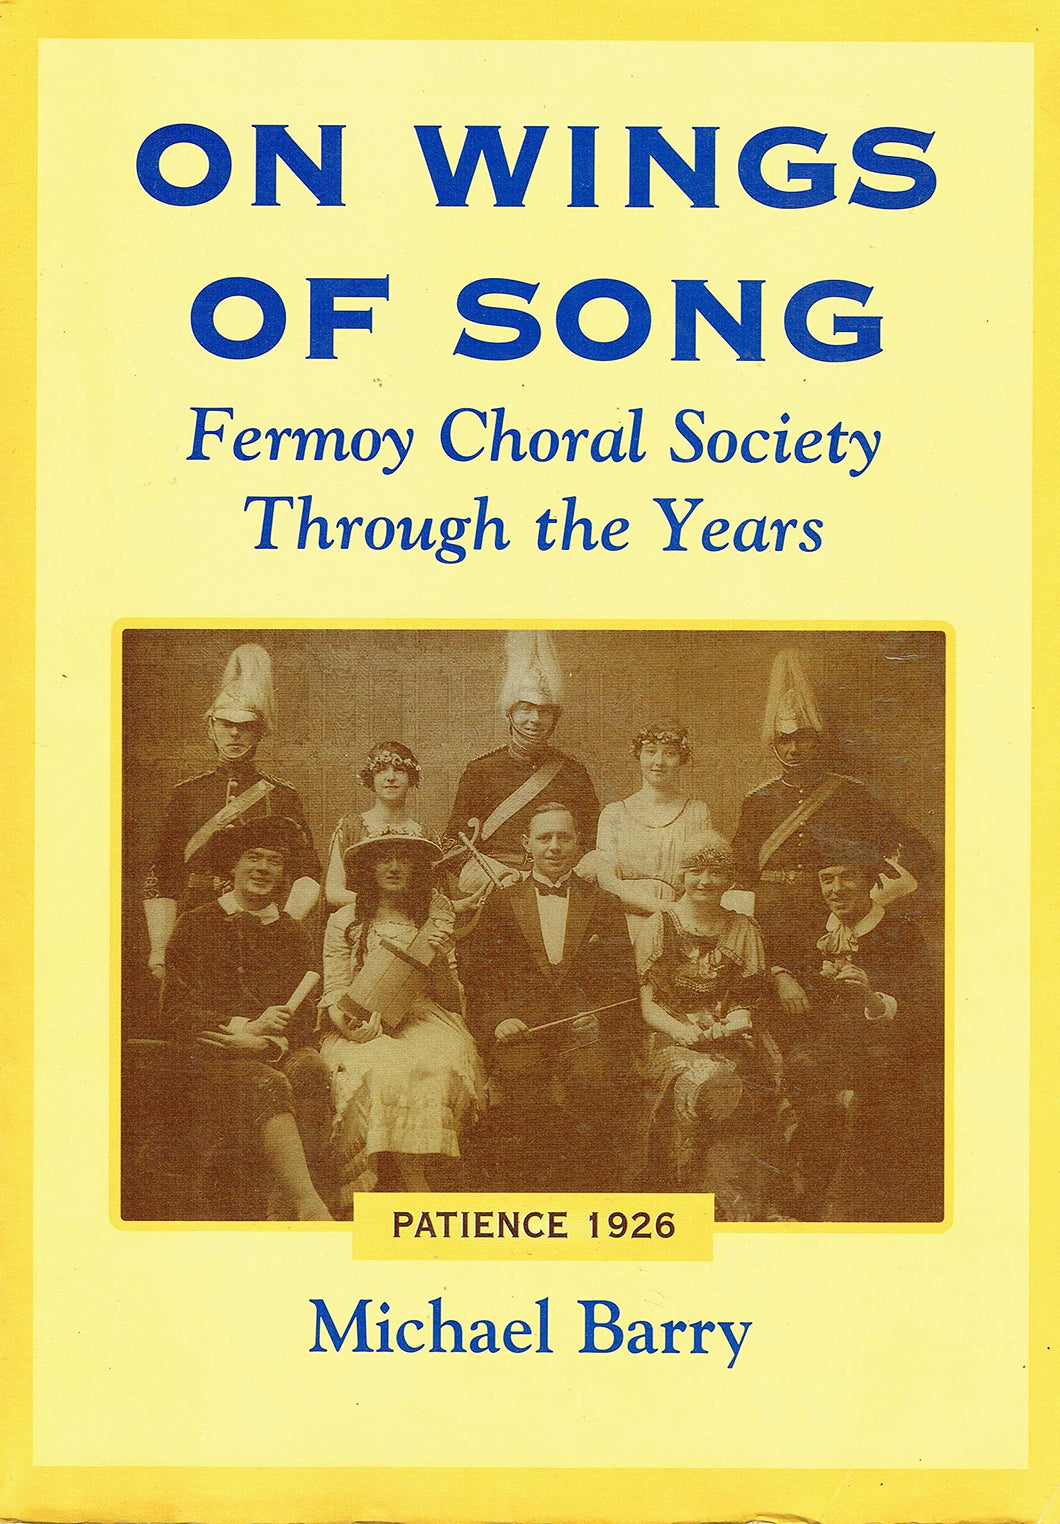 On Wings of Song: Fermoy Choral Society Through the Years